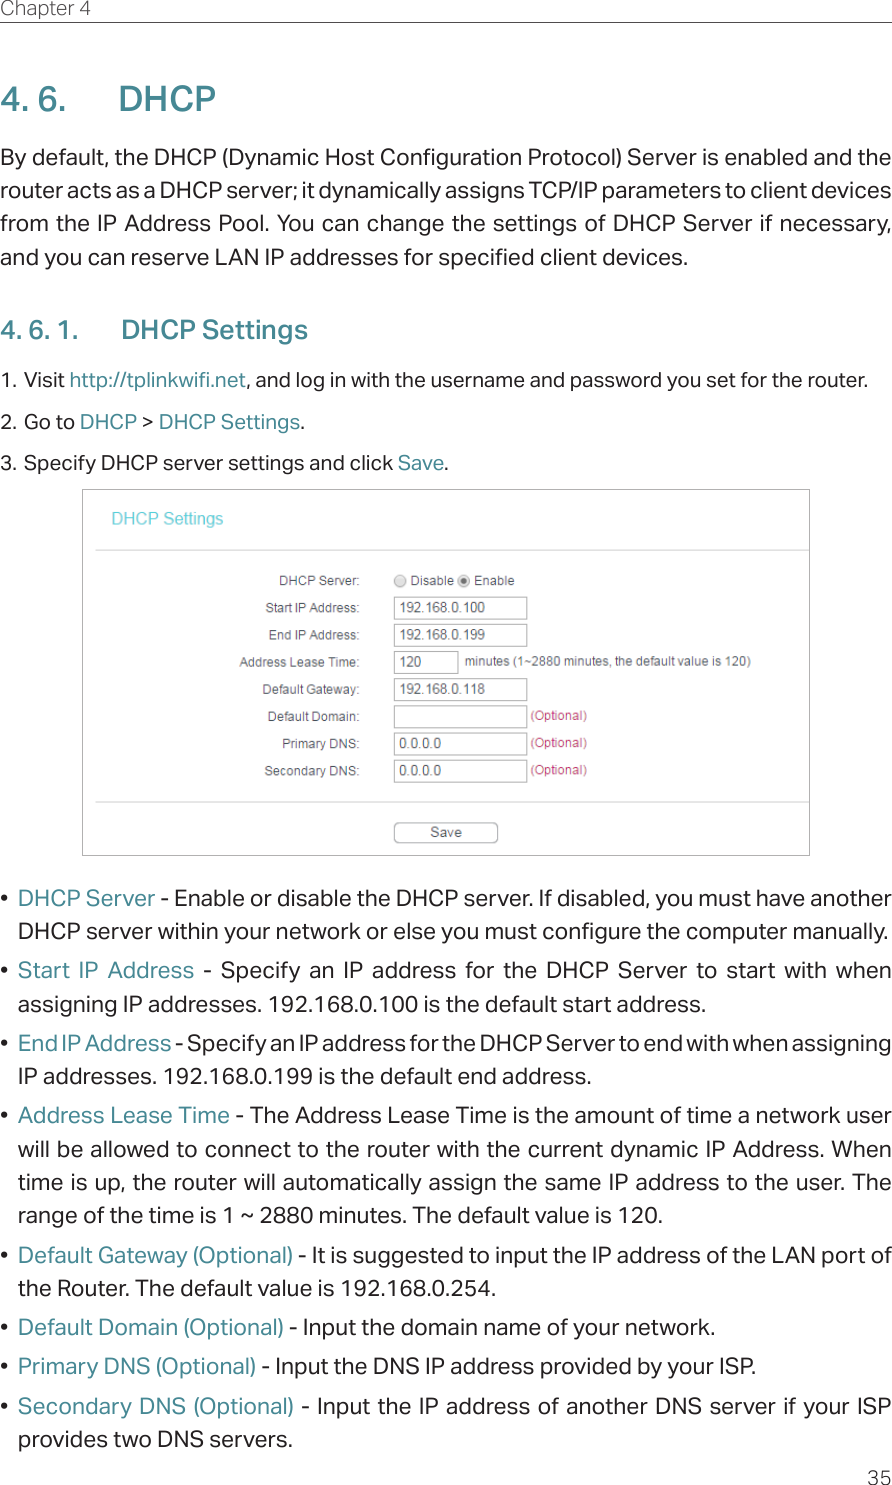 35Chapter 4  4. 6.  DHCPBy default, the DHCP (Dynamic Host Configuration Protocol) Server is enabled and the router acts as a DHCP server; it dynamically assigns TCP/IP parameters to client devices from the IP Address Pool. You can change the settings of DHCP Server if necessary, and you can reserve LAN IP addresses for specified client devices.4. 6. 1.  DHCP Settings1. Visit http://tplinkwifi.net, and log in with the username and password you set for the router.2. Go to DHCP &gt; DHCP Settings. 3. Specify DHCP server settings and click Save.•  DHCP Server - Enable or disable the DHCP server. If disabled, you must have another DHCP server within your network or else you must configure the computer manually.•  Start IP Address - Specify an IP address for the DHCP Server to start with when assigning IP addresses. 192.168.0.100 is the default start address.•  End IP Address - Specify an IP address for the DHCP Server to end with when assigning IP addresses. 192.168.0.199 is the default end address.•  Address Lease Time - The Address Lease Time is the amount of time a network user will be allowed to connect to the router with the current dynamic IP Address. When time is up, the router will automatically assign the same IP address to the user. The range of the time is 1 ~ 2880 minutes. The default value is 120.•  Default Gateway (Optional) - It is suggested to input the IP address of the LAN port of the Router. The default value is 192.168.0.254.•  Default Domain (Optional) - Input the domain name of your network.•  Primary DNS (Optional) - Input the DNS IP address provided by your ISP.•  Secondary DNS (Optional) - Input the IP address of another DNS server if your ISP provides two DNS servers.